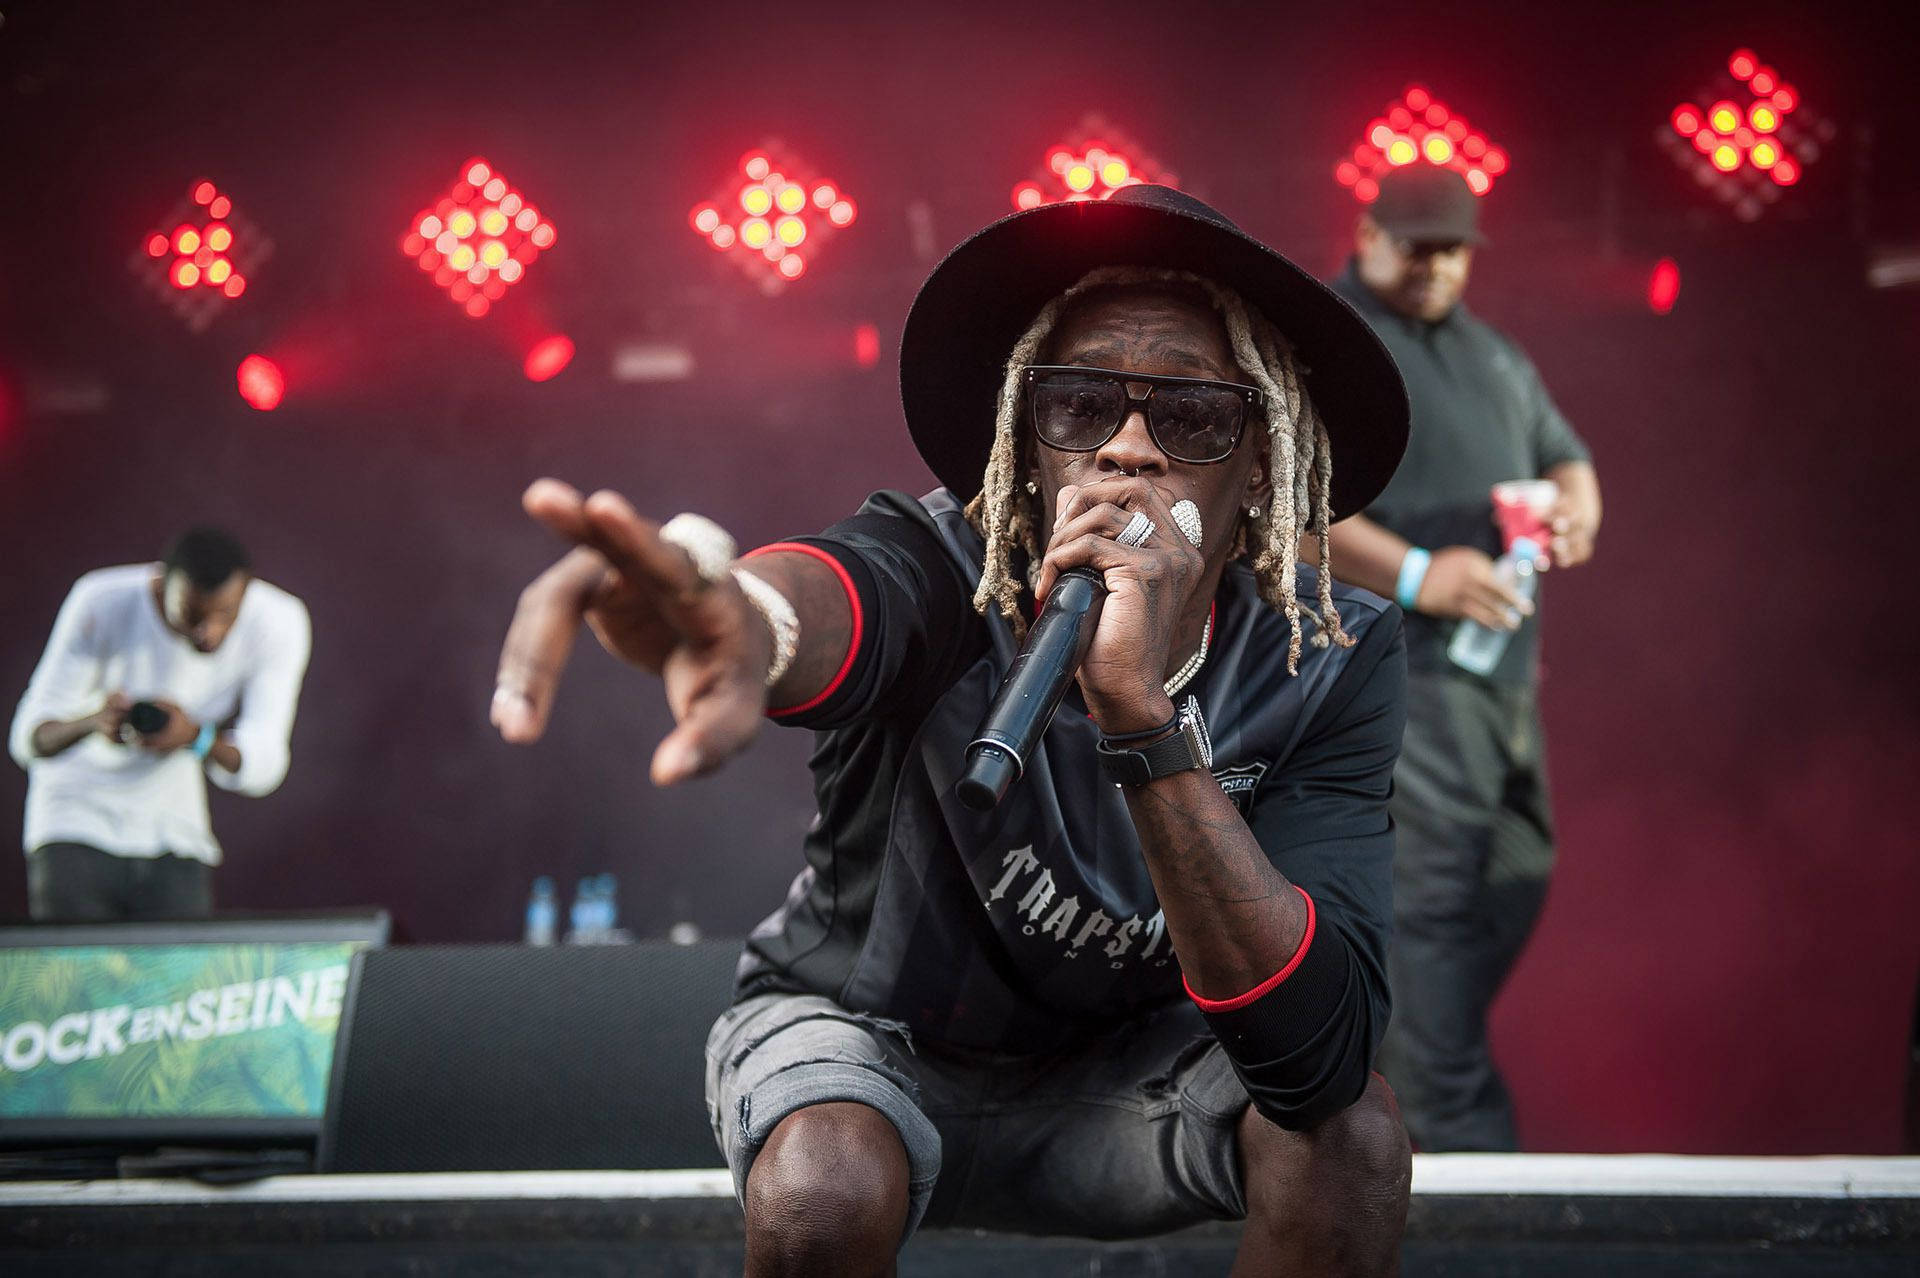 Rapper Young Thug Brings The Audience To Their Feet During A Live Performance